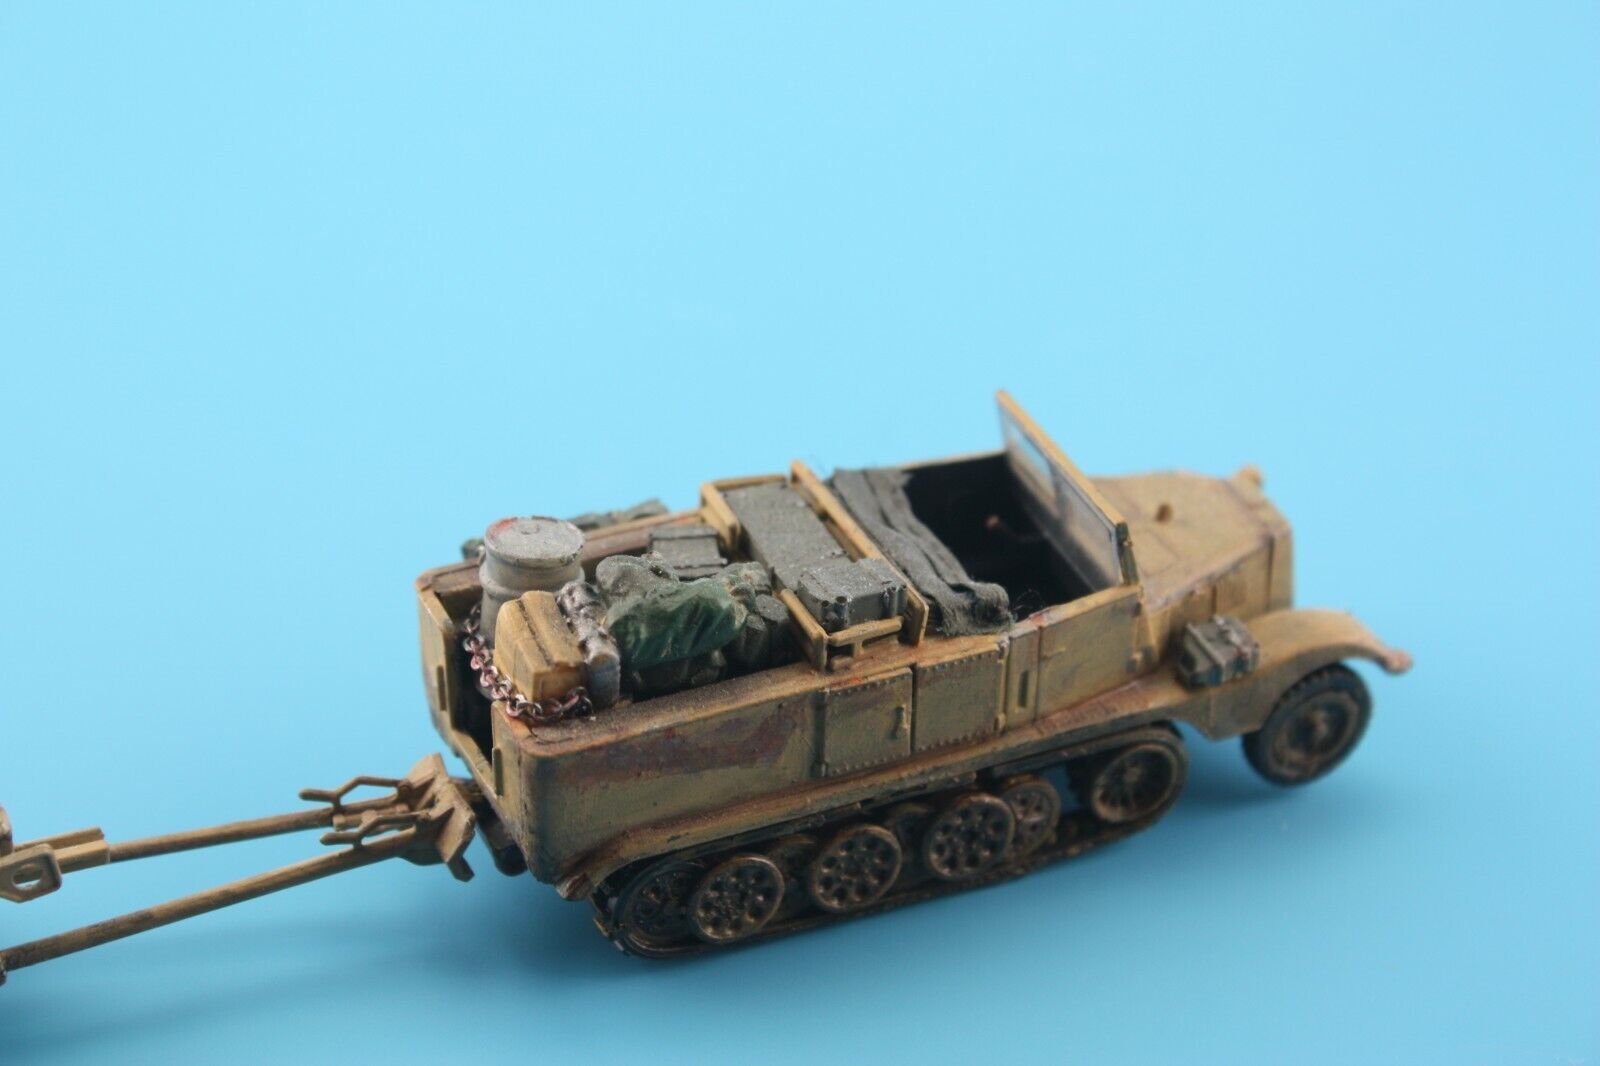 1:72 or 1:76 - Sd.Kfz.11 Half Truck Transporter  Military Sacale Model Stowage